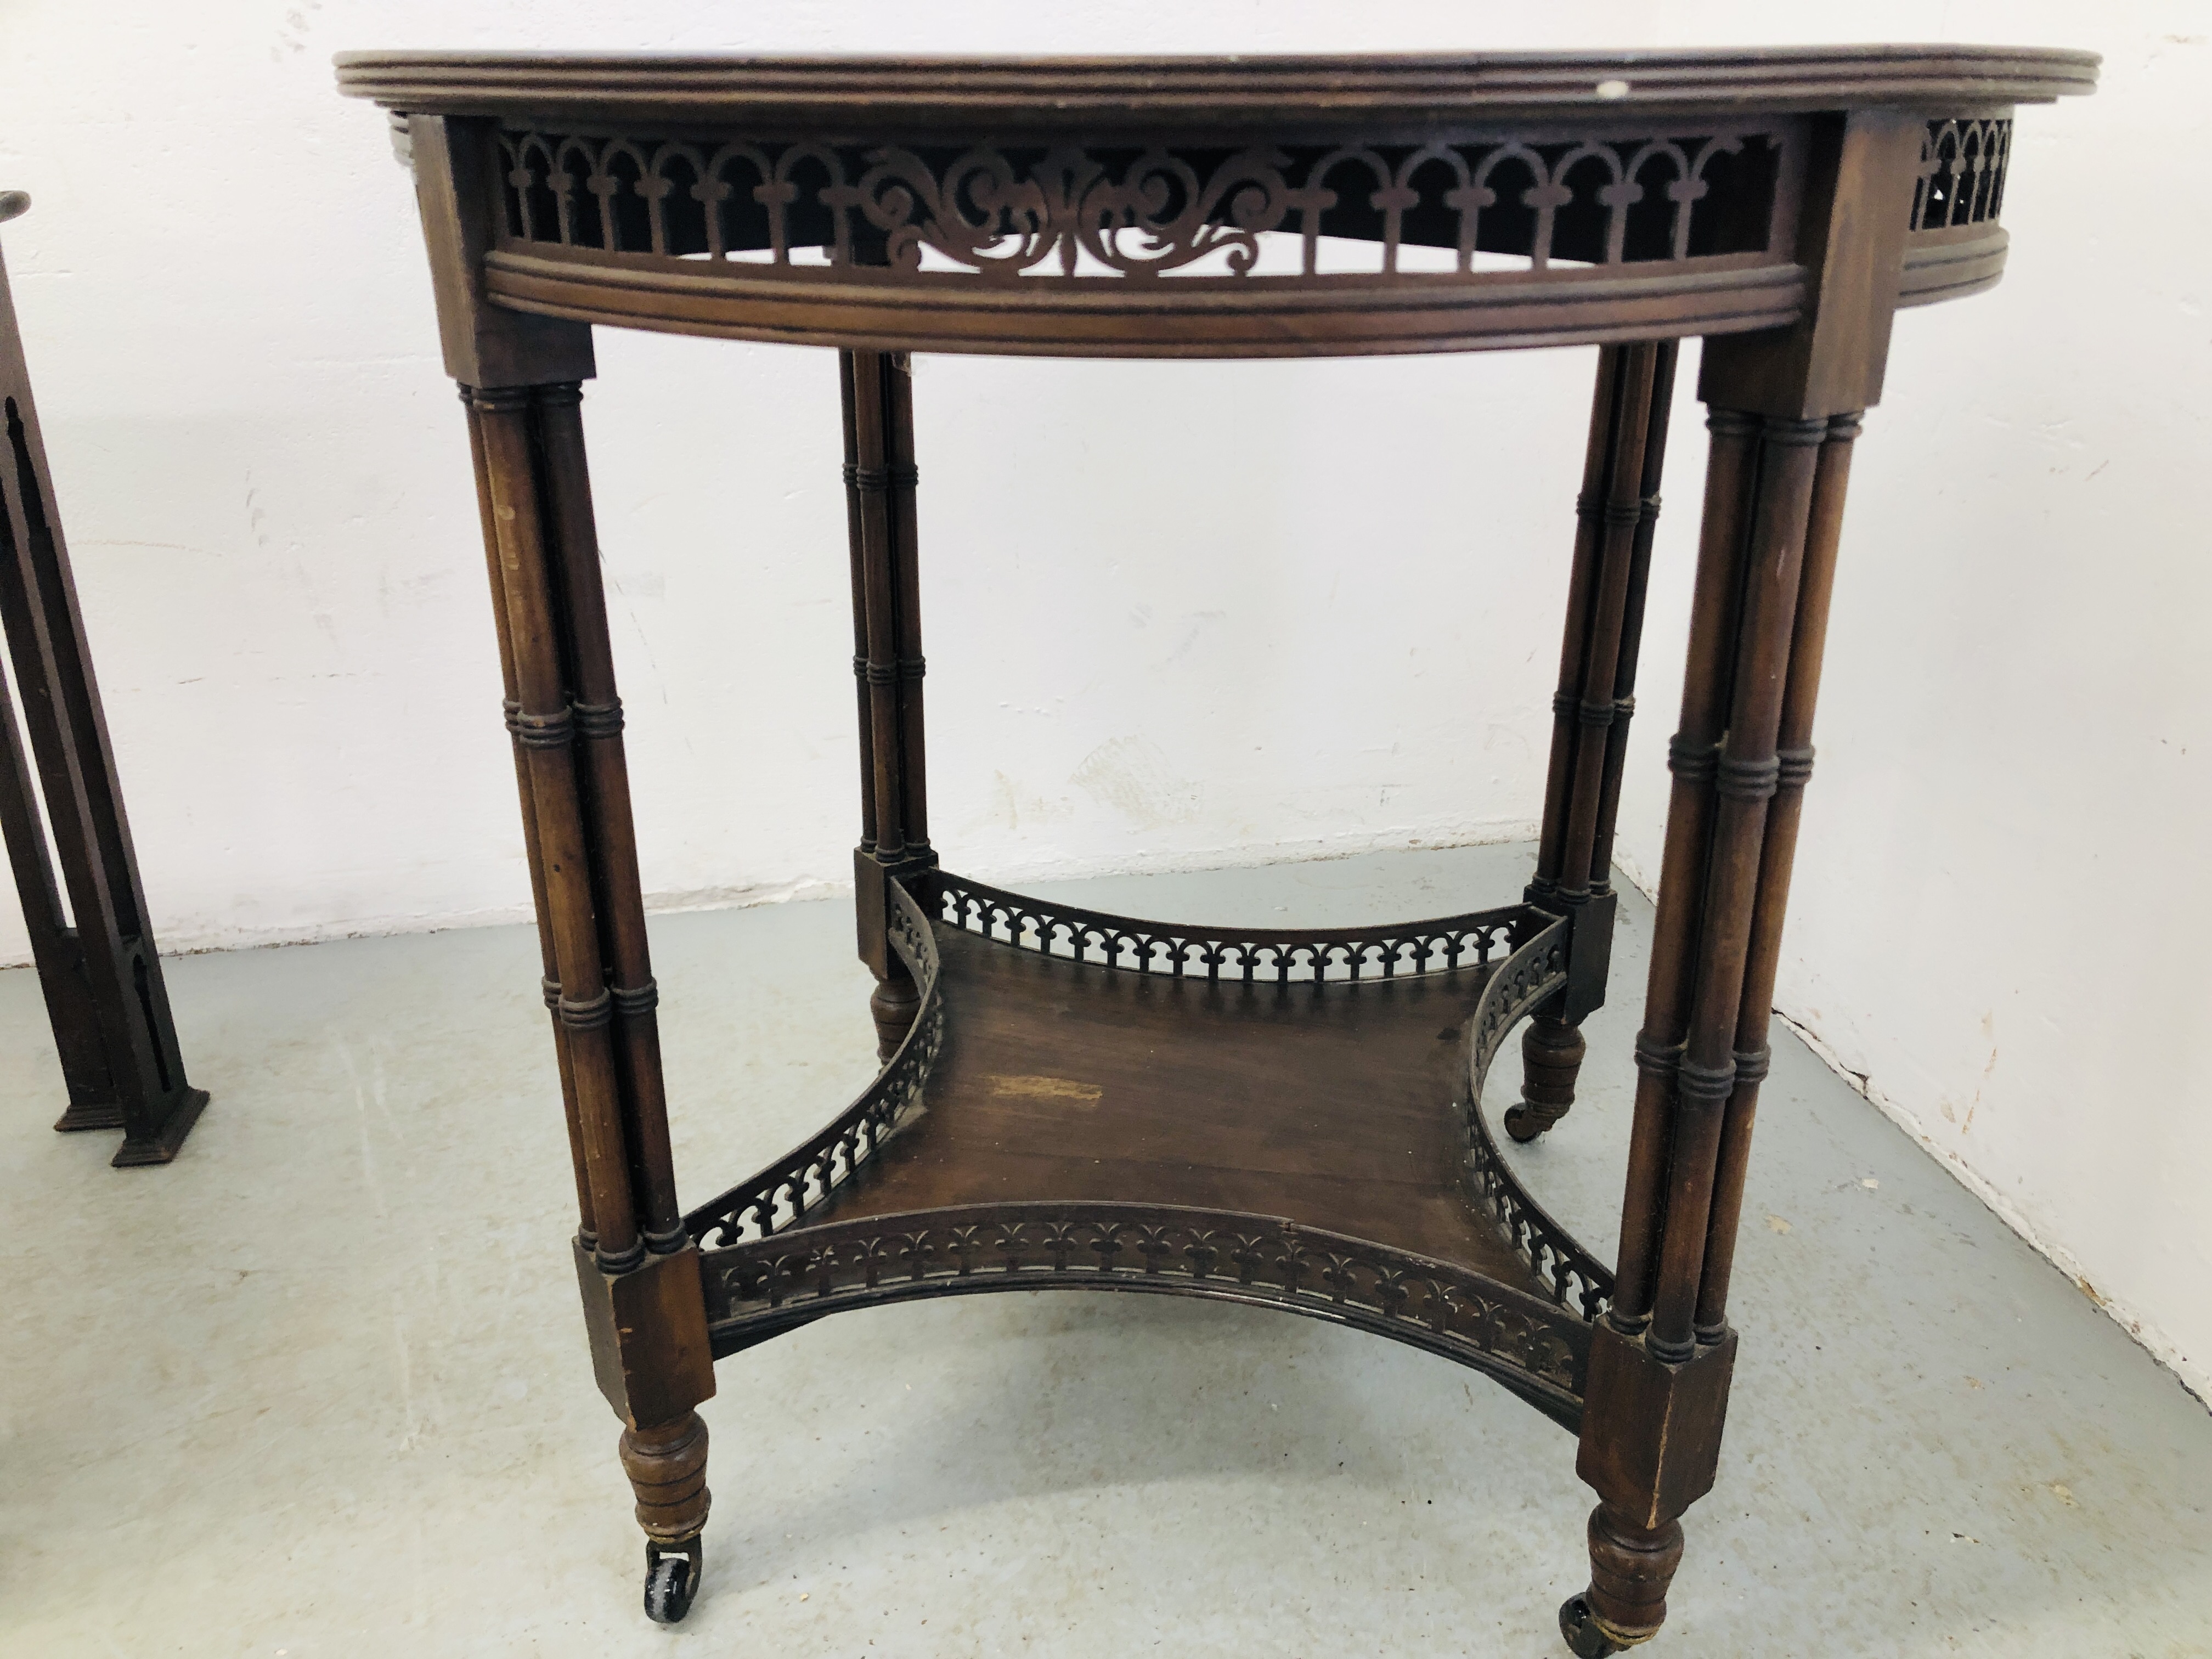 AN ANTIQUE CIRCULAR OCCASIONAL TABLE WITH FRET WORK DETAIL AND GALLERIED SHELF BELOW EACH LEGS - Image 7 of 10